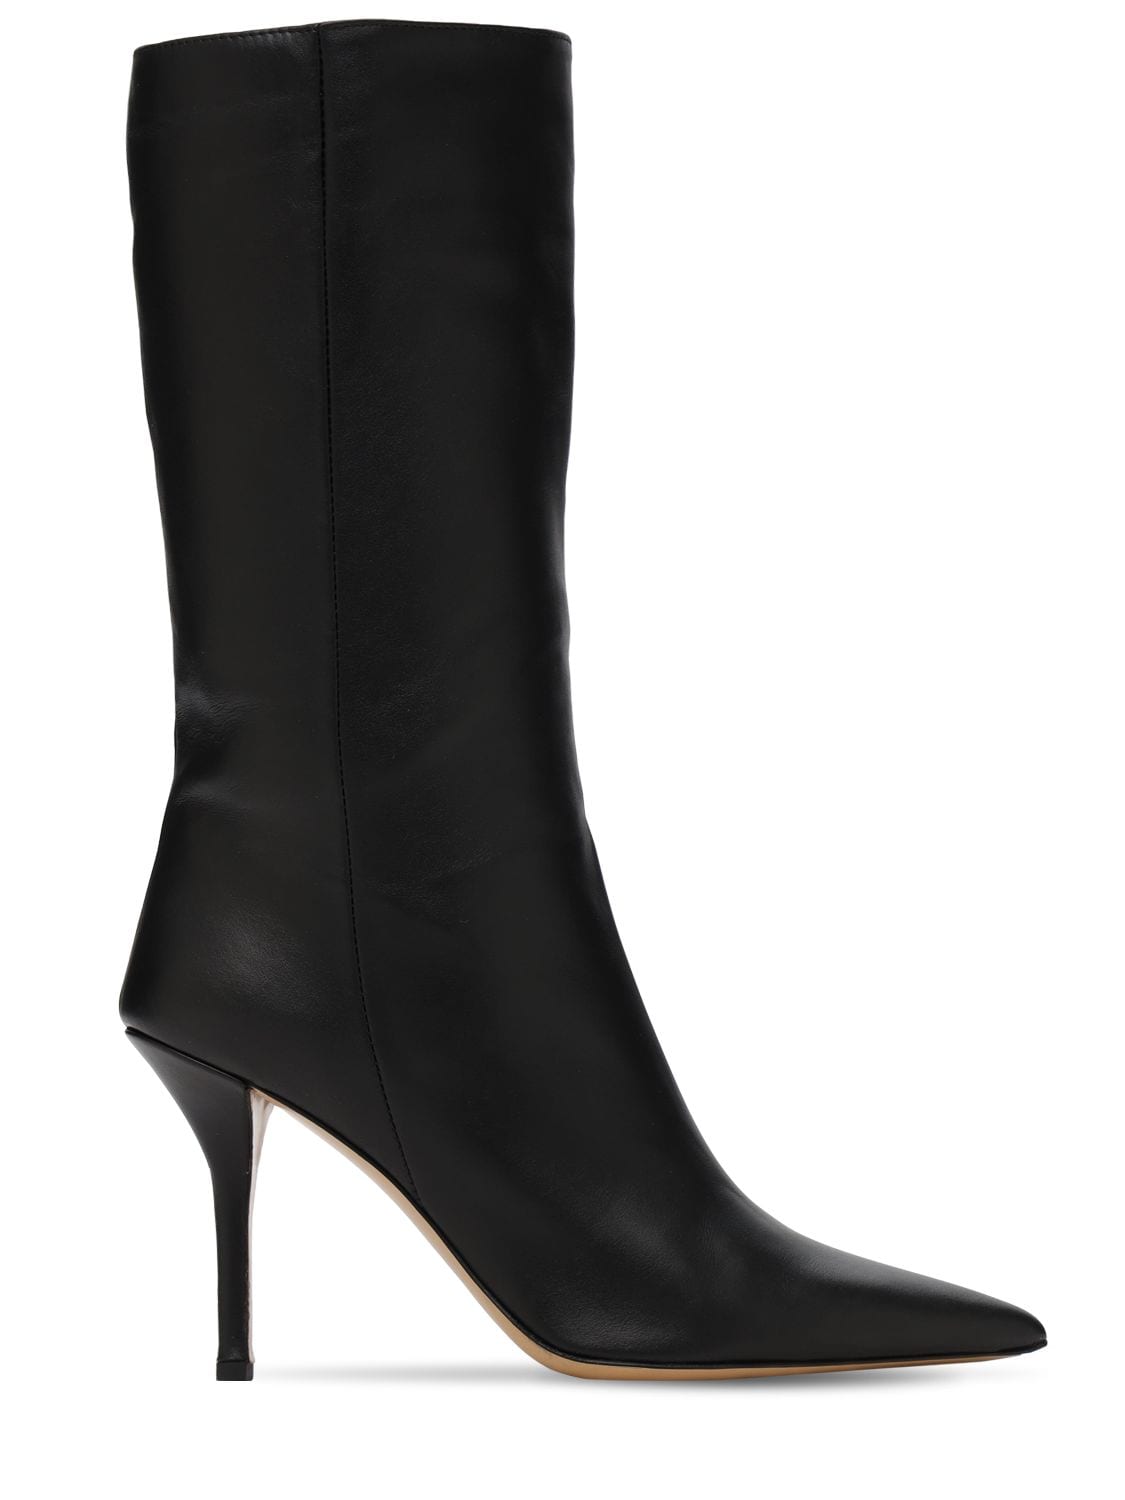 GIA X PERNILLE TEISBAEK 85mm Mid High Leather Boots